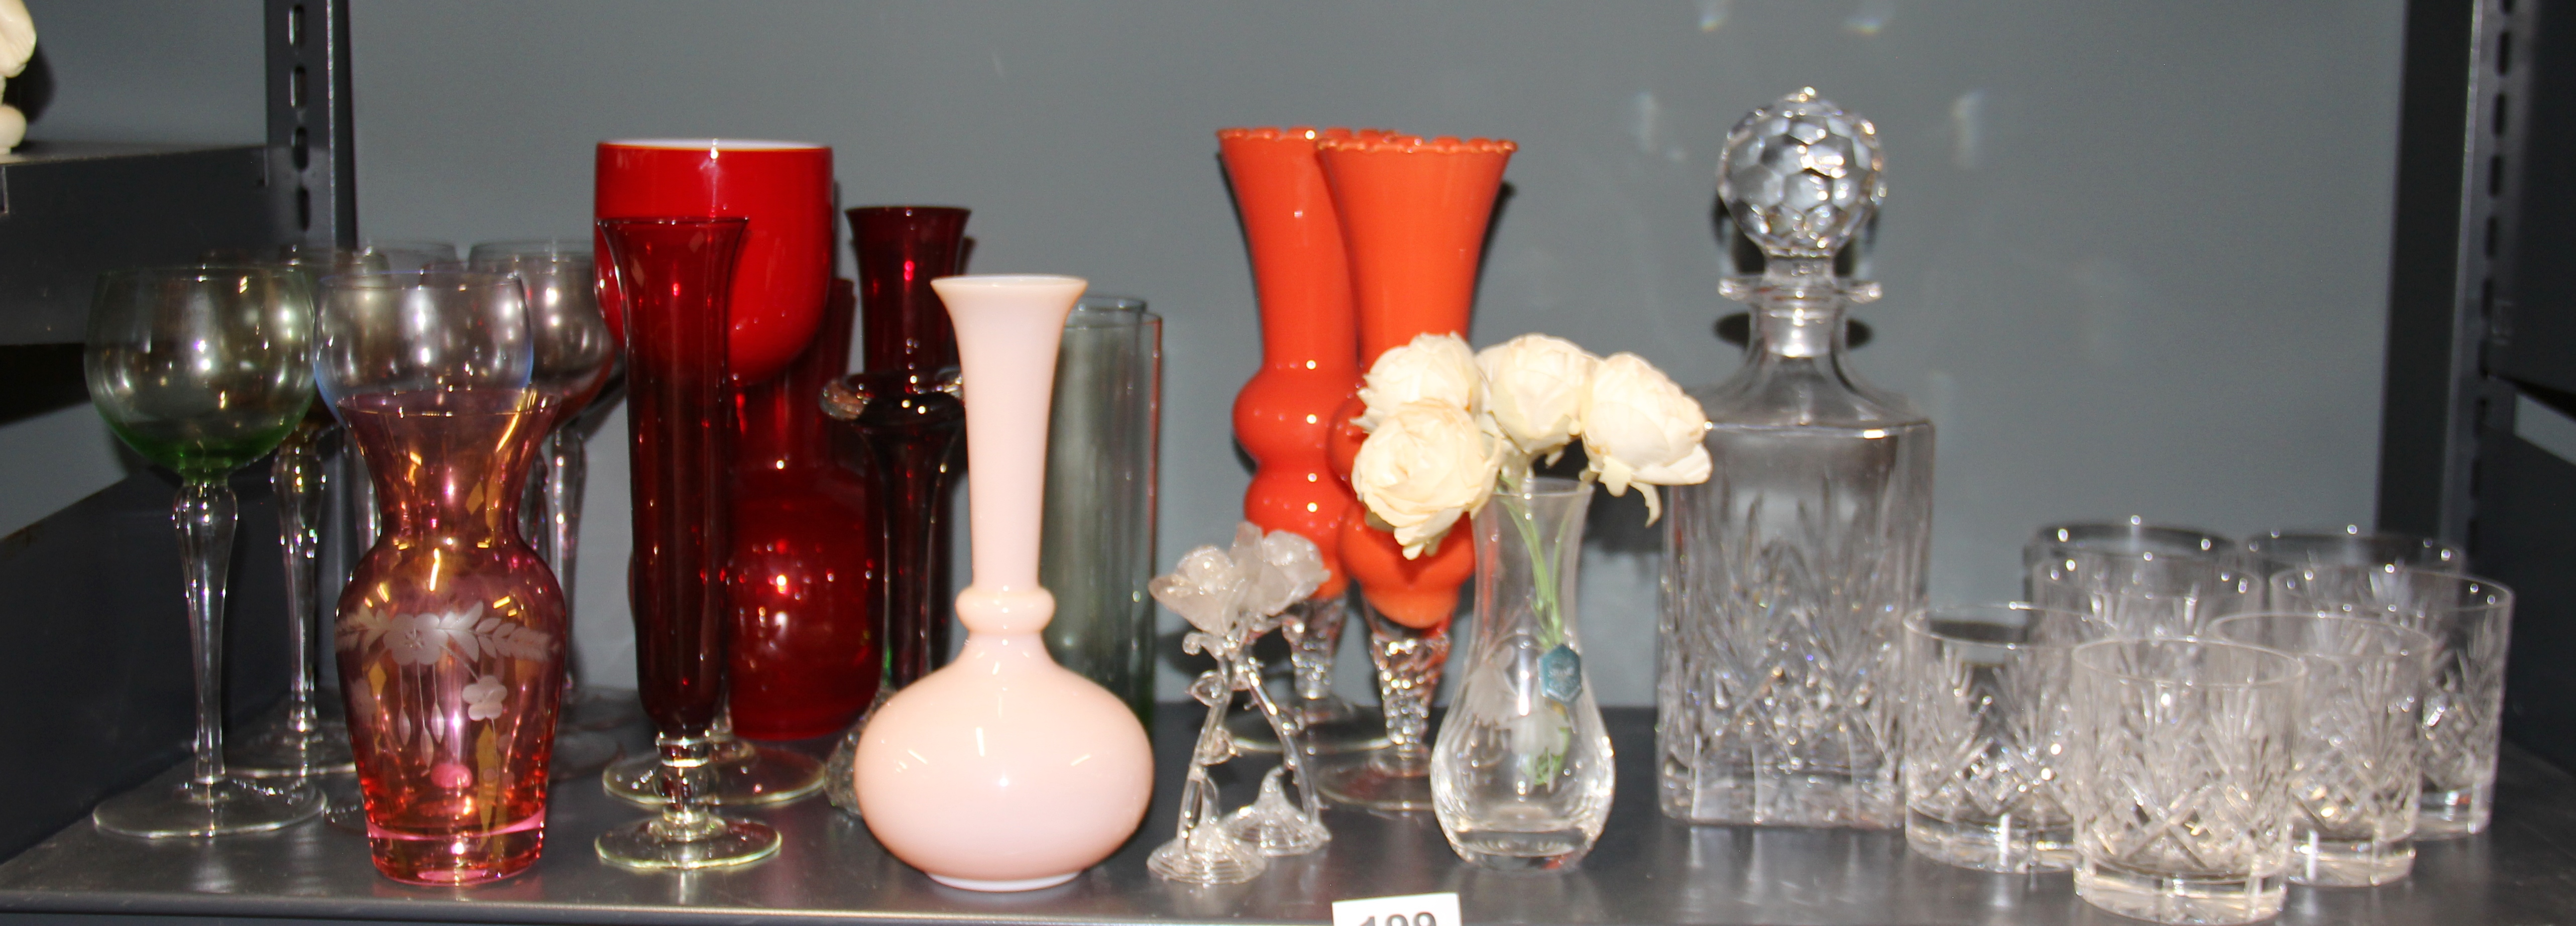 A cut glass decanter, glasses and other items. - Image 2 of 3